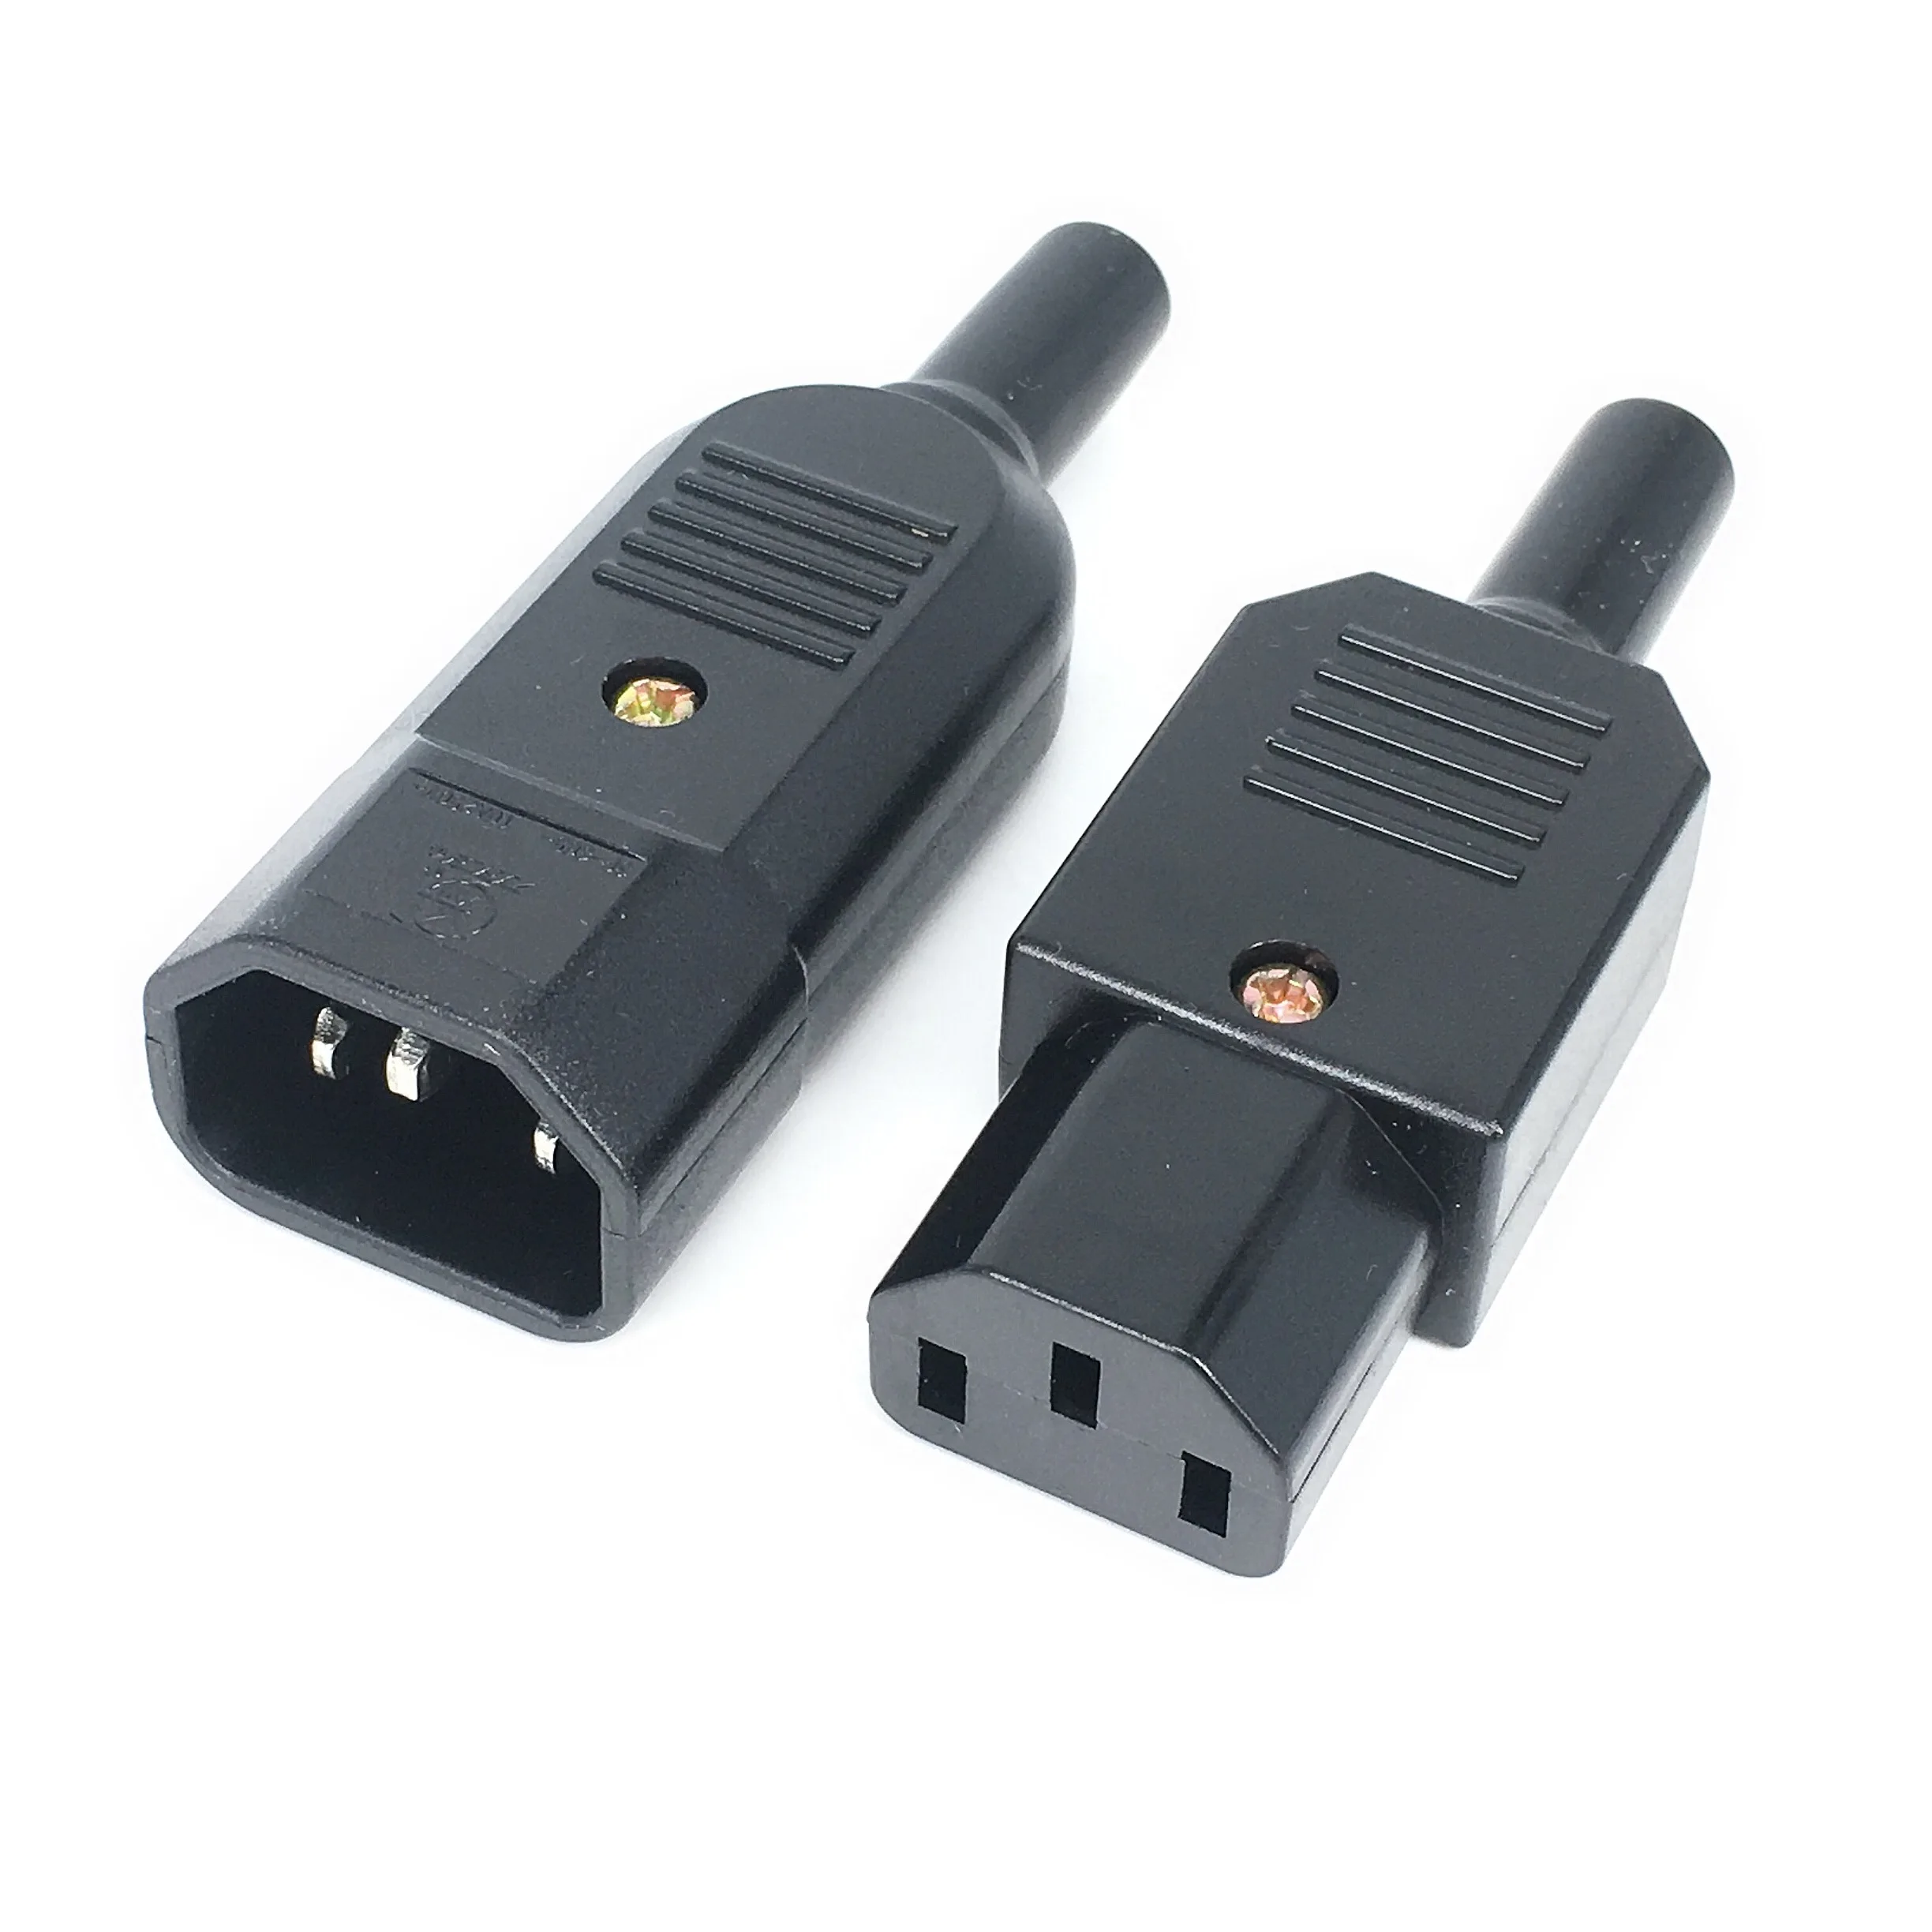 IEC 320 C13 Female Plug Adapter 3pin Socket Power Cord Rewirable Connector RS 